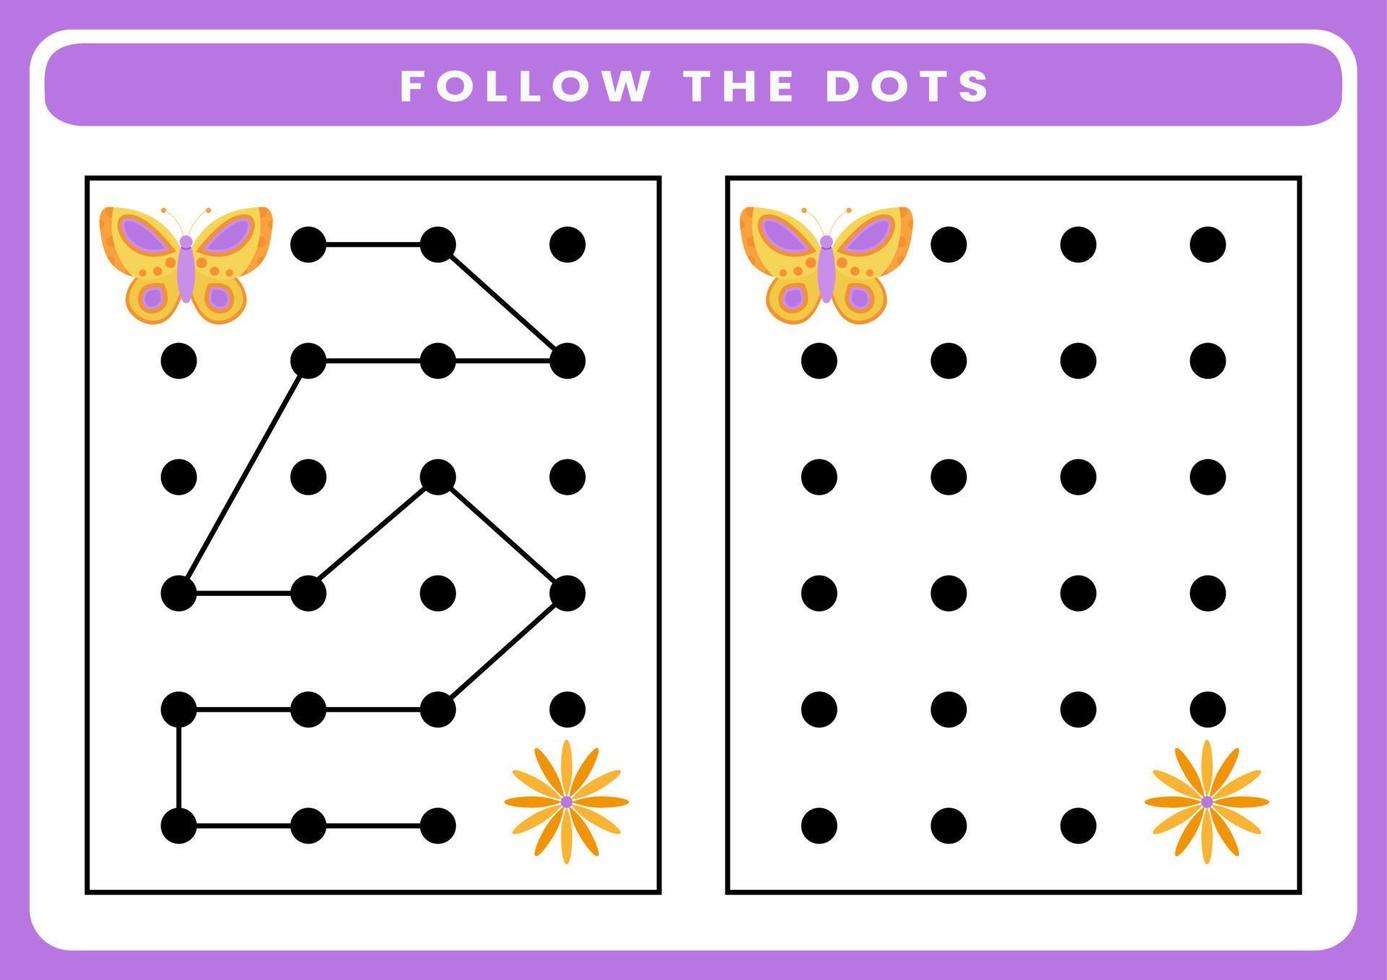 Follow the dots worksheet for kids vector